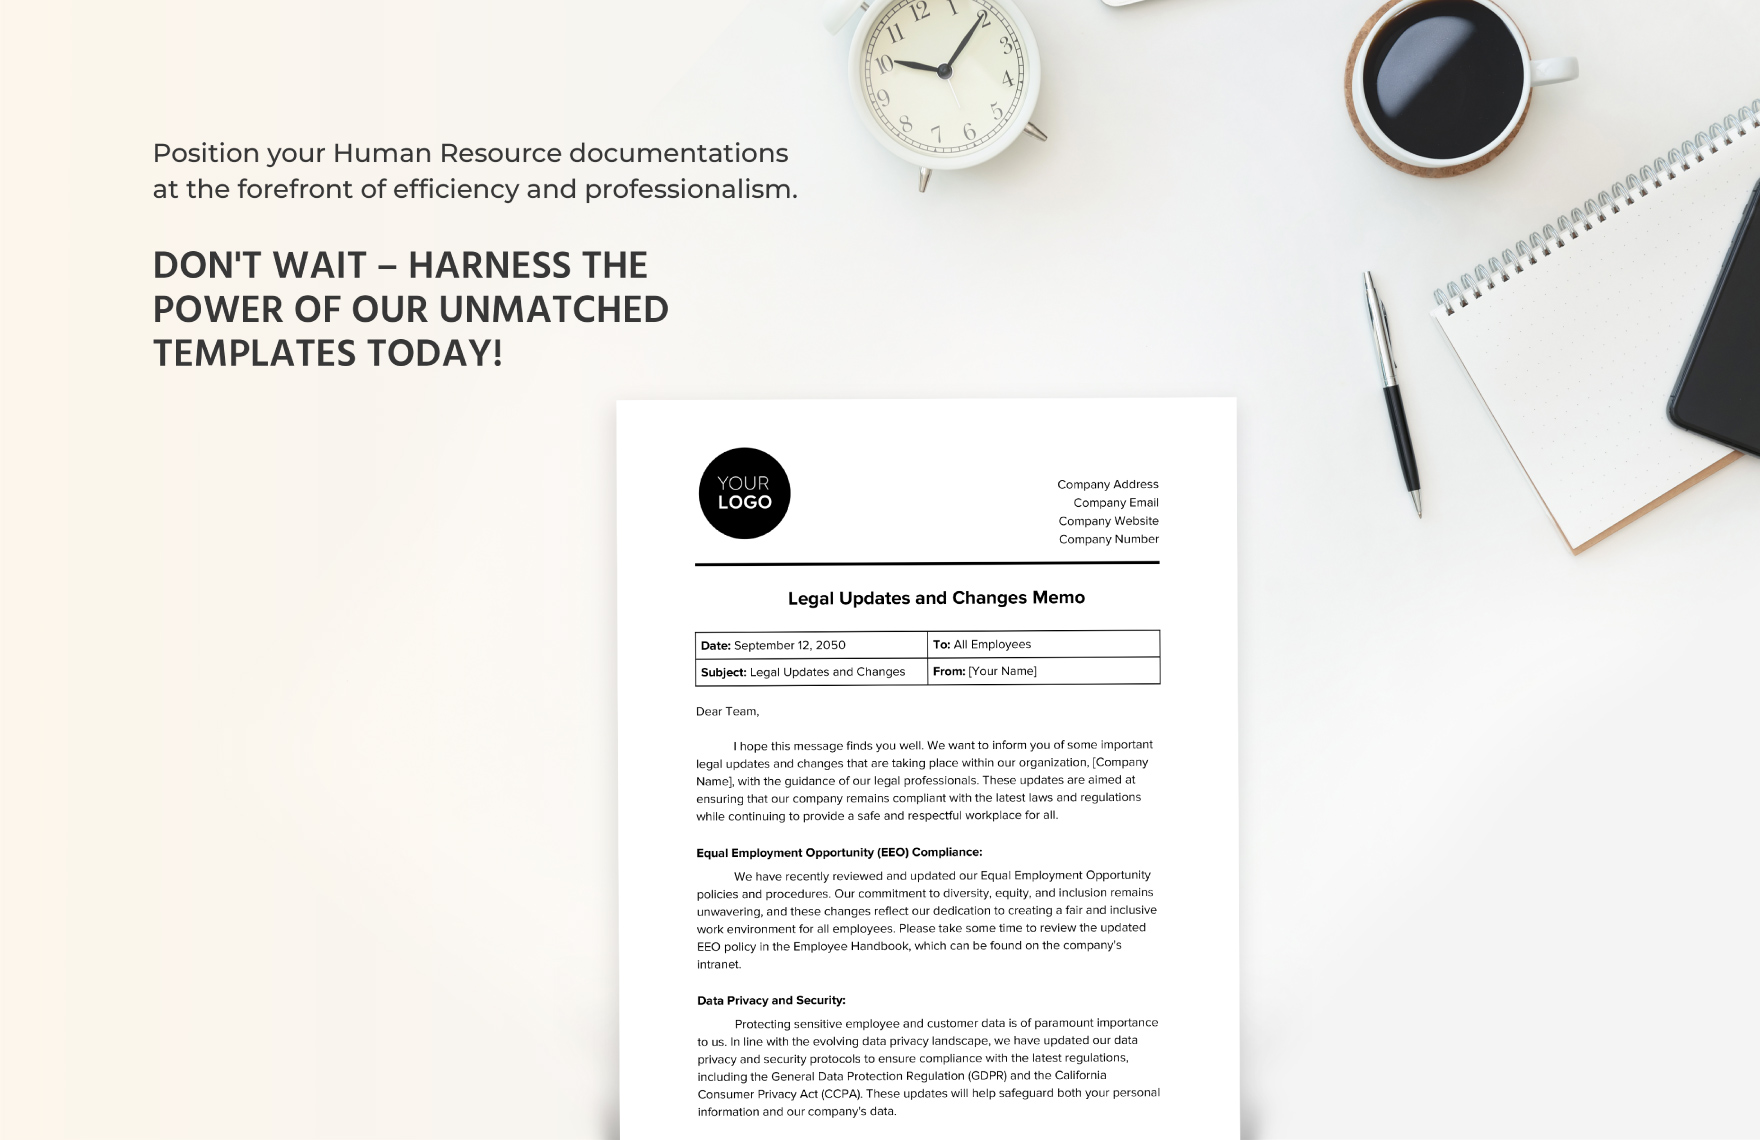 Legal Updates and Changes Memo HR Template